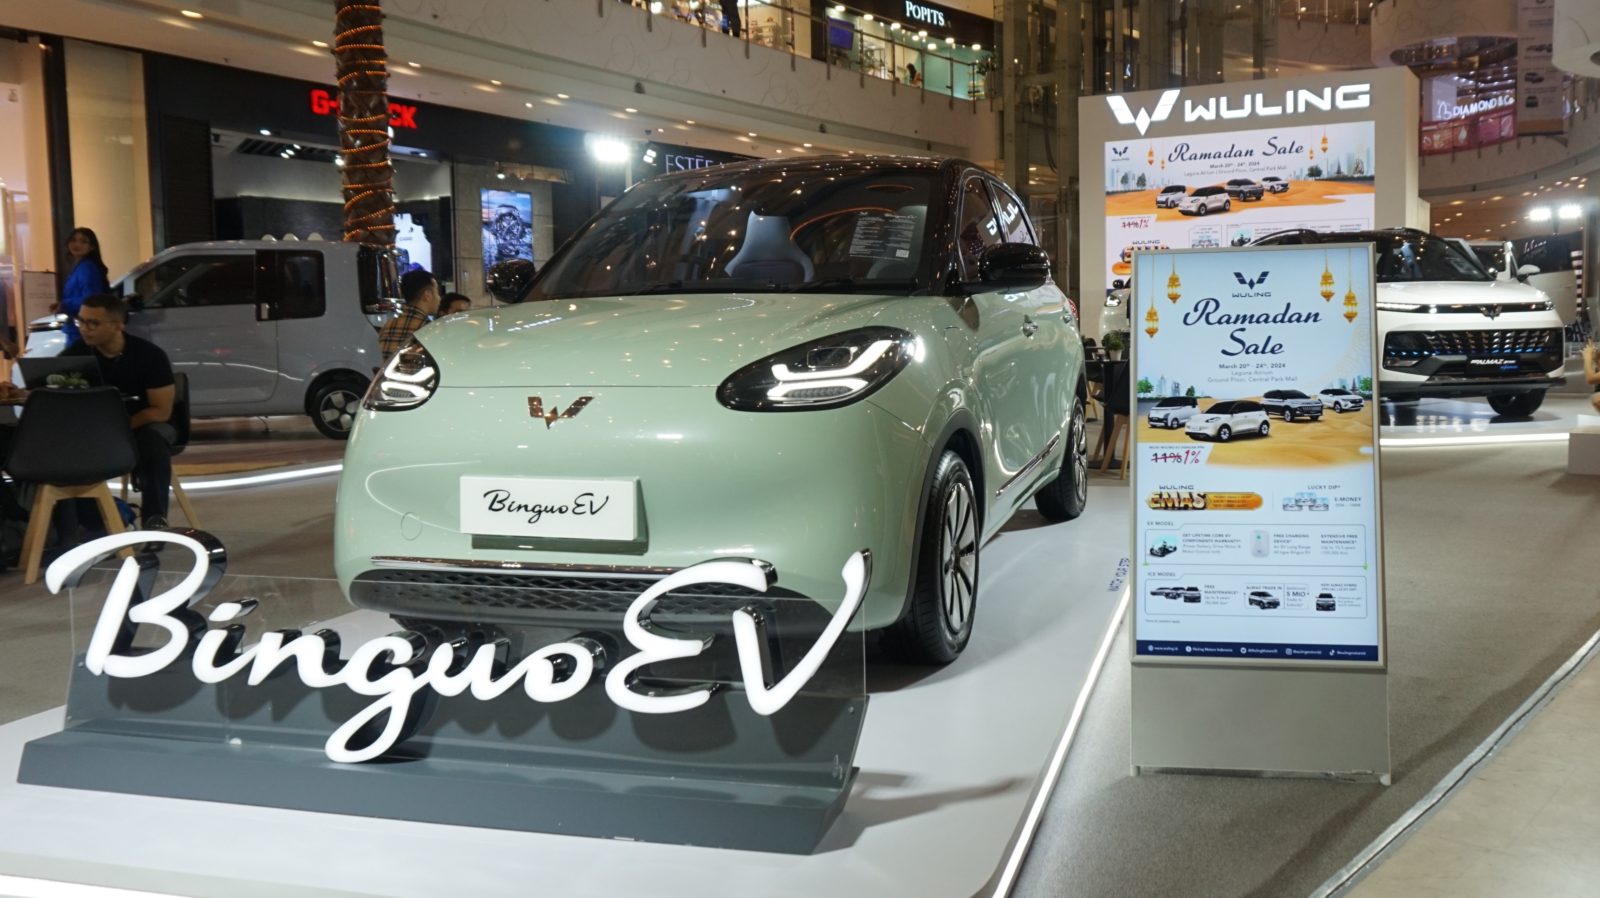 Image Wuling Celebrates the Blessed Month with ‘Wuling Ramadan Sale’ Exhibition